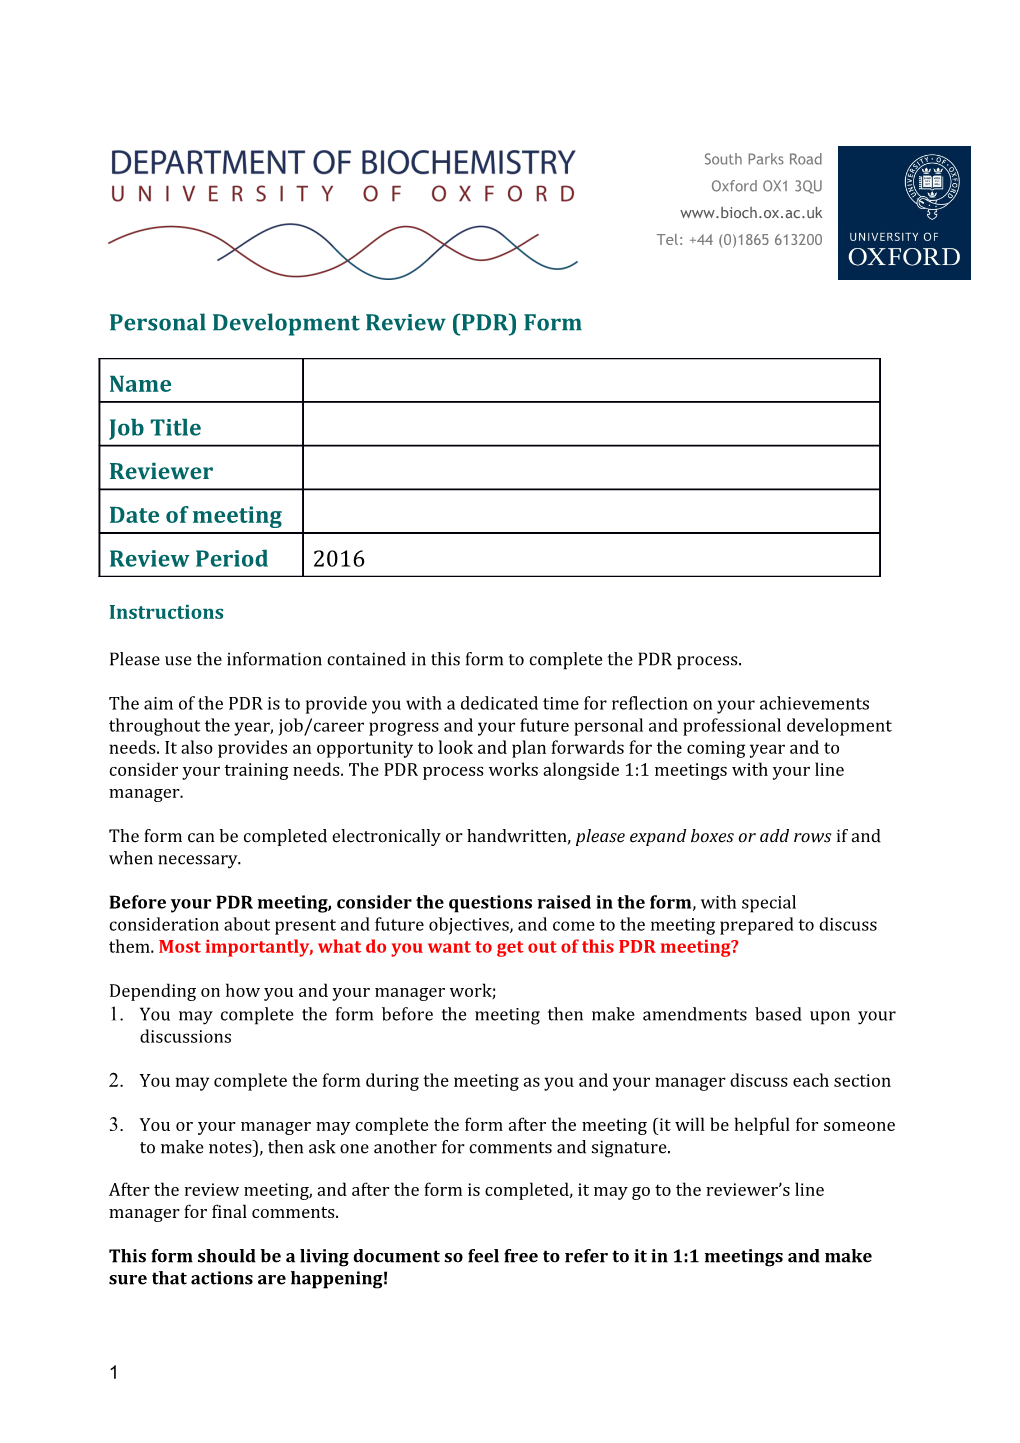 Personal Development Review (PDR)Form